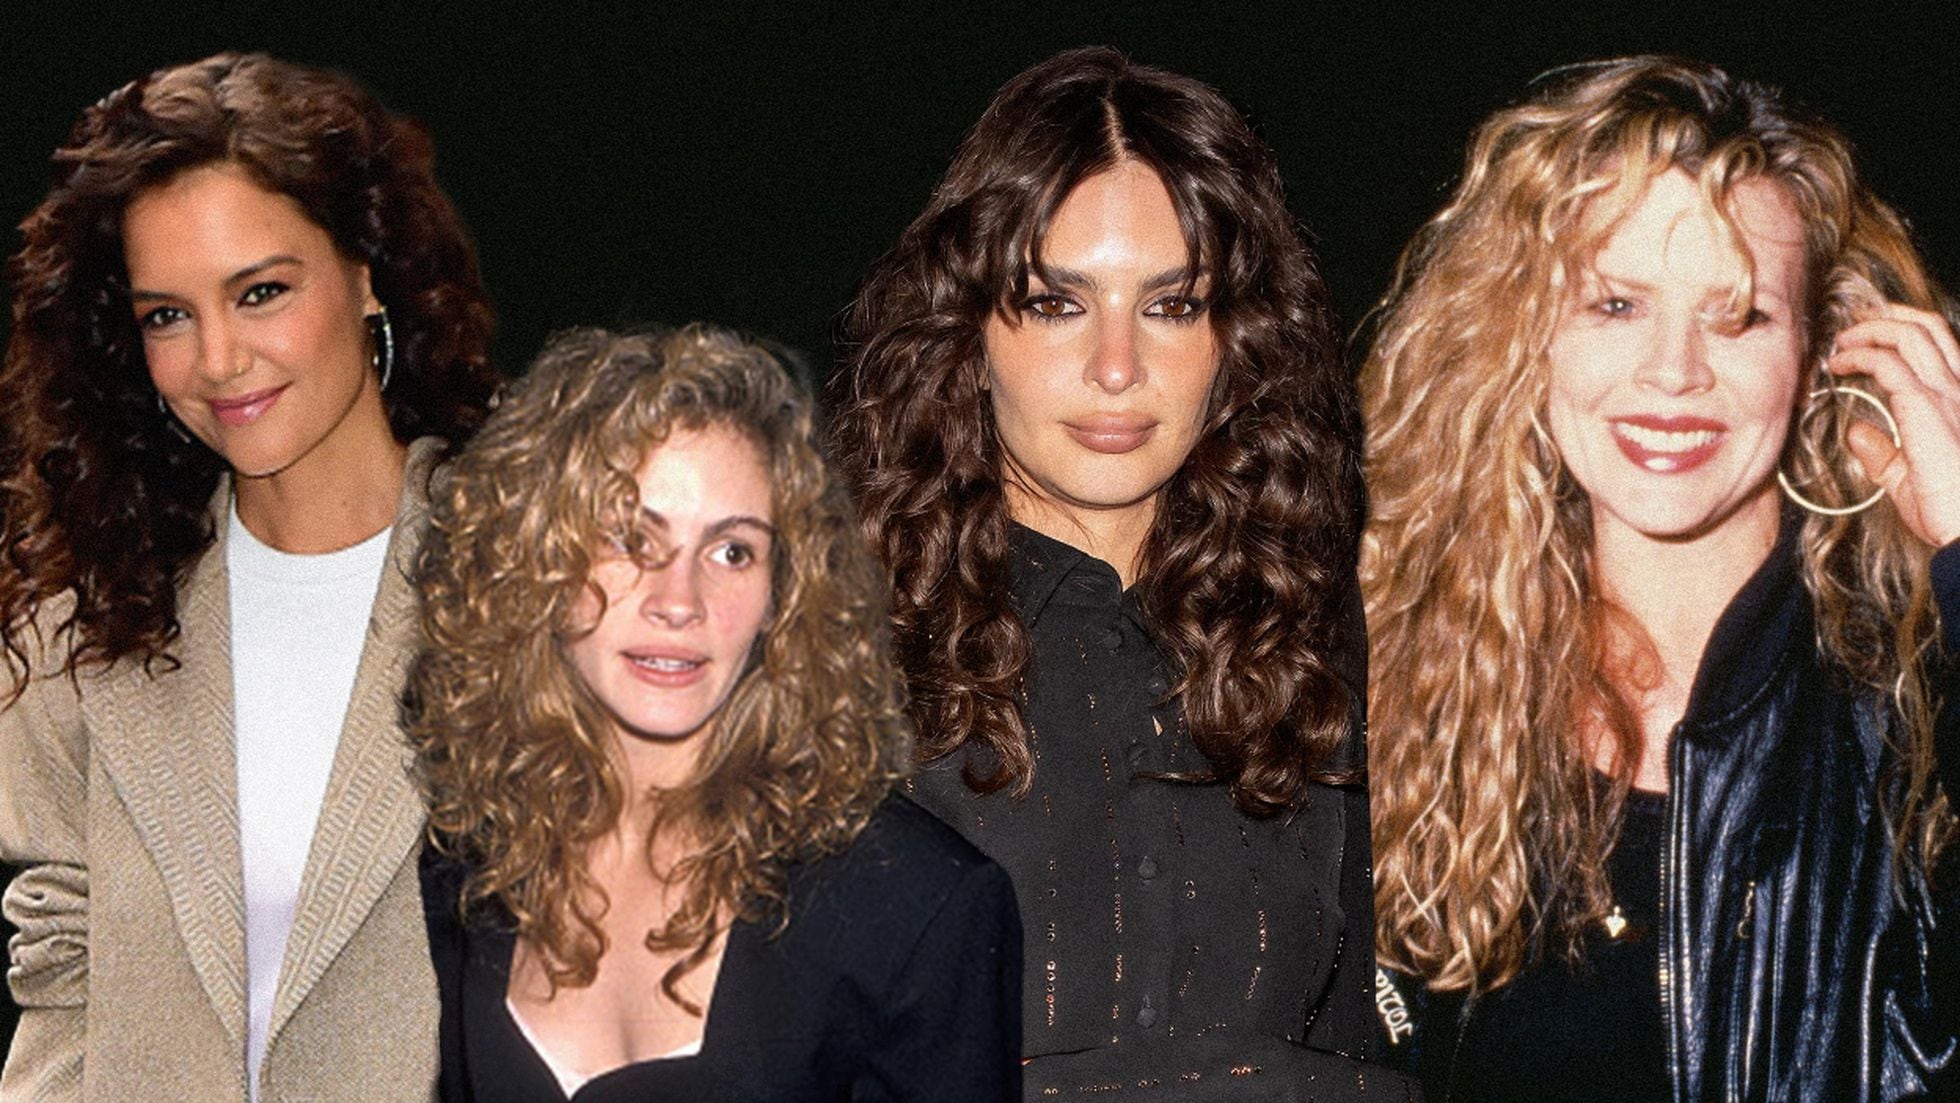 The Perm Is Making a Comeback, According to Stylists